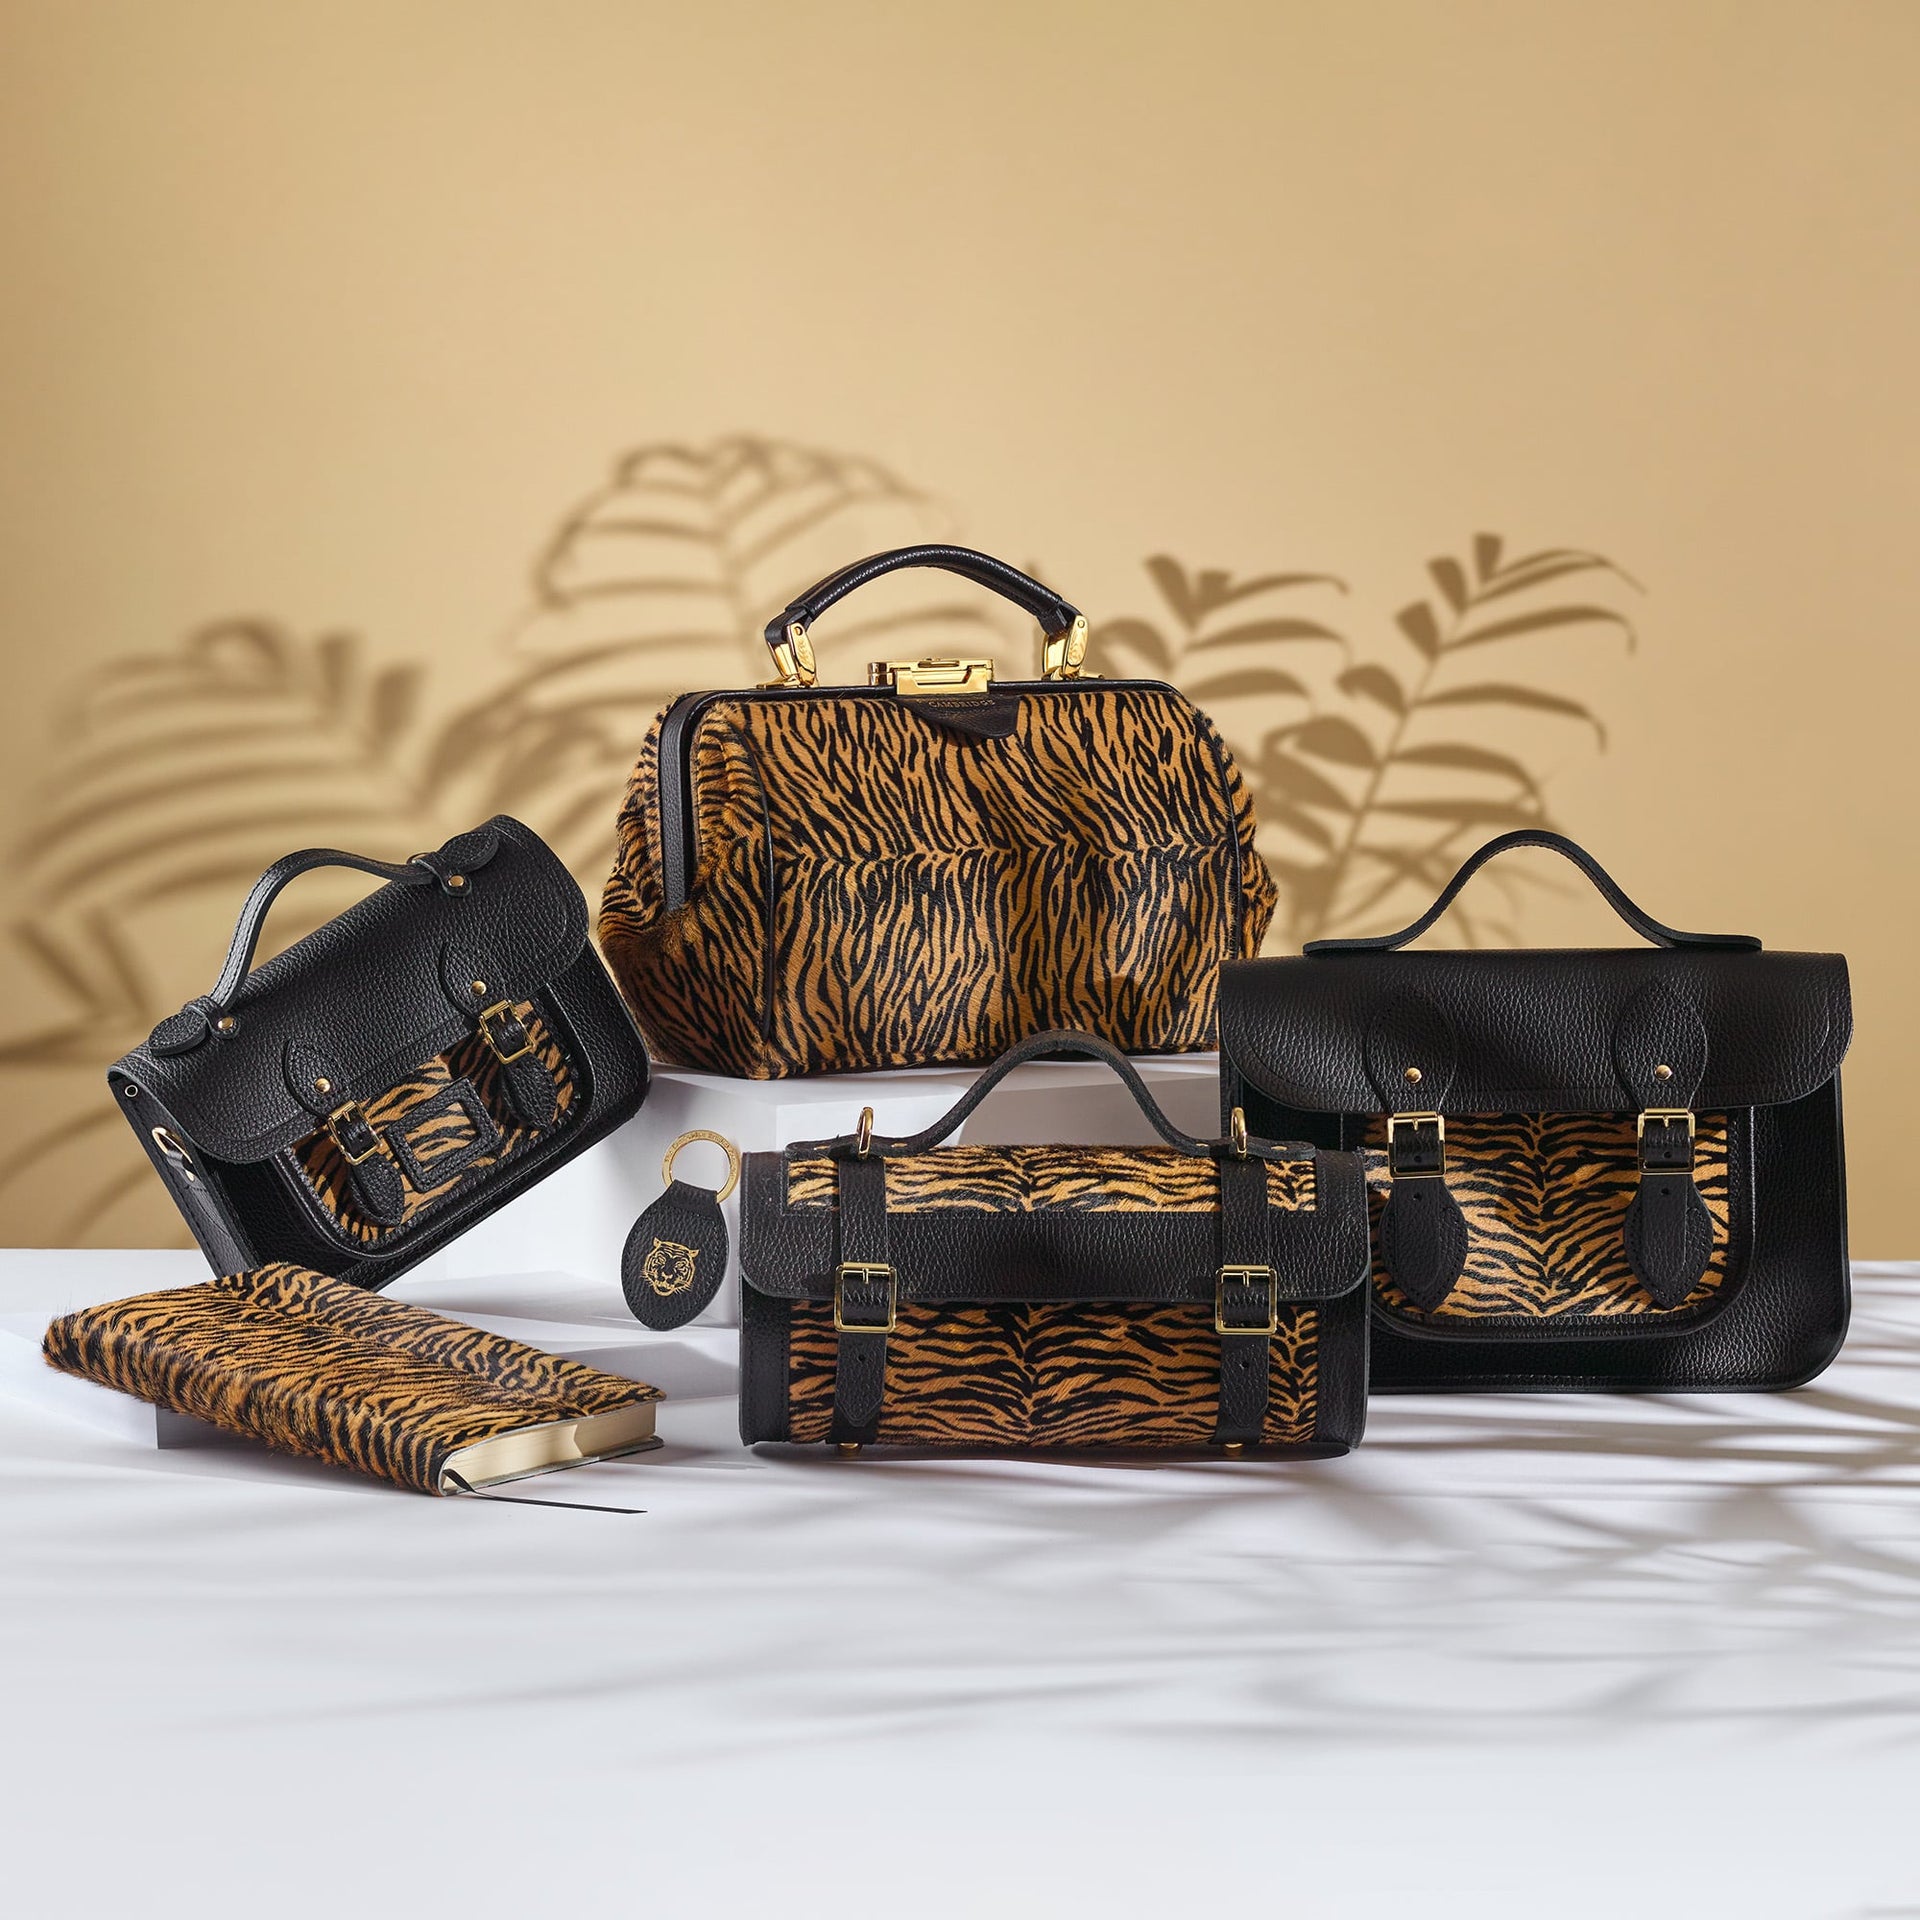 The Year of the Tiger 2022 - The Cambridge Satchel Company EU Store